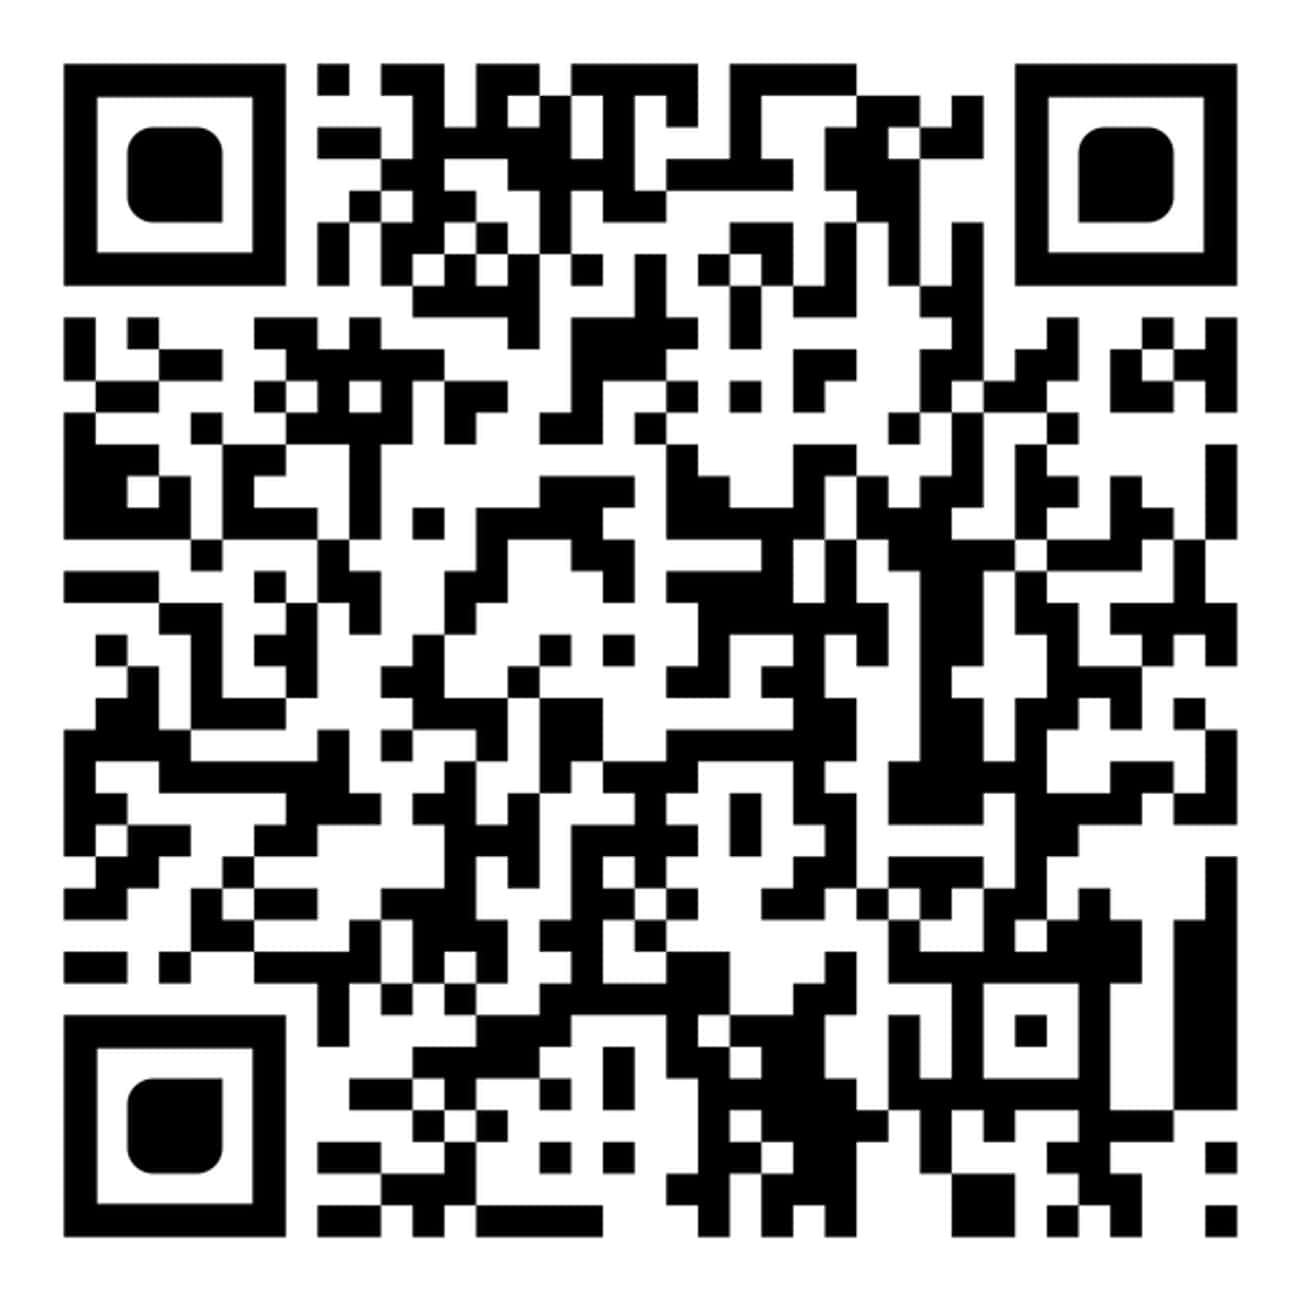 What Does The 'QR' In A QR Code Mean?